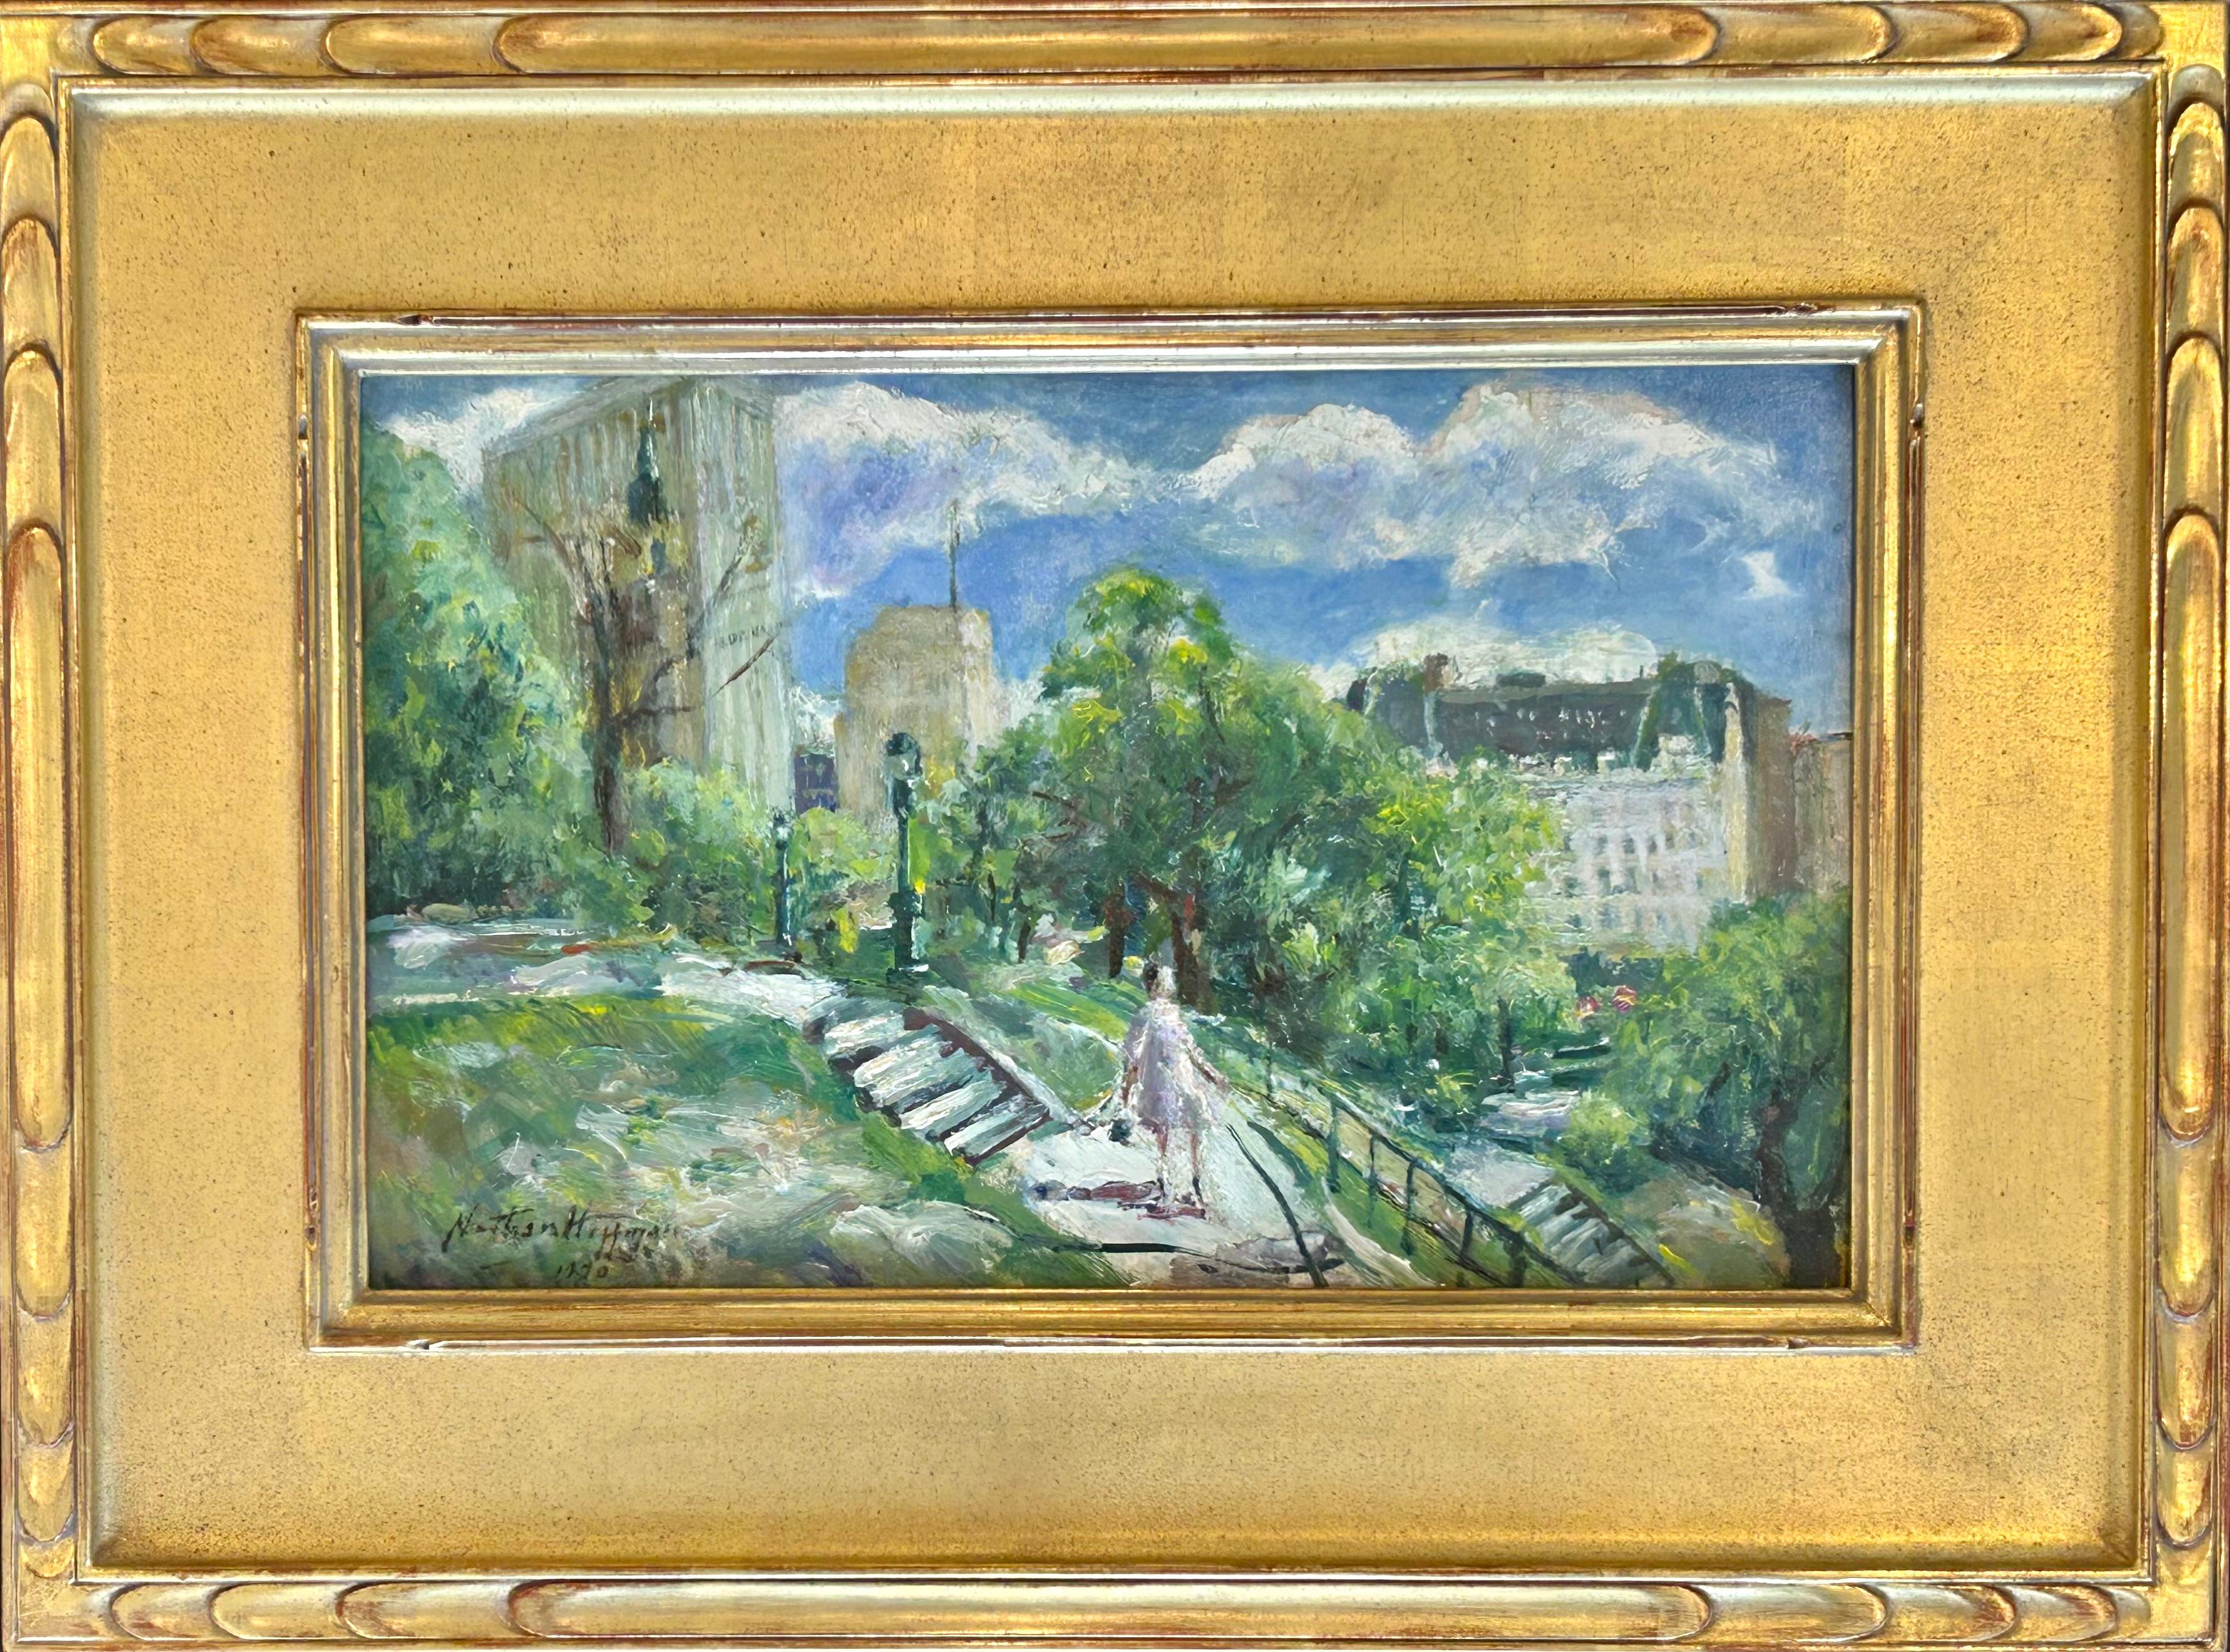 Nathan Hoffman
Central Park, Sherry Netherland Hotel, and Plaza Hotel, 1970
Signed, dated, titled on the reverse
Oil on artists board
10 x 16 inches


Born in Russia, the son of Friede (1878 – 1956) and Benjamin Hoffman (1878 – a. 1942). Benjamin